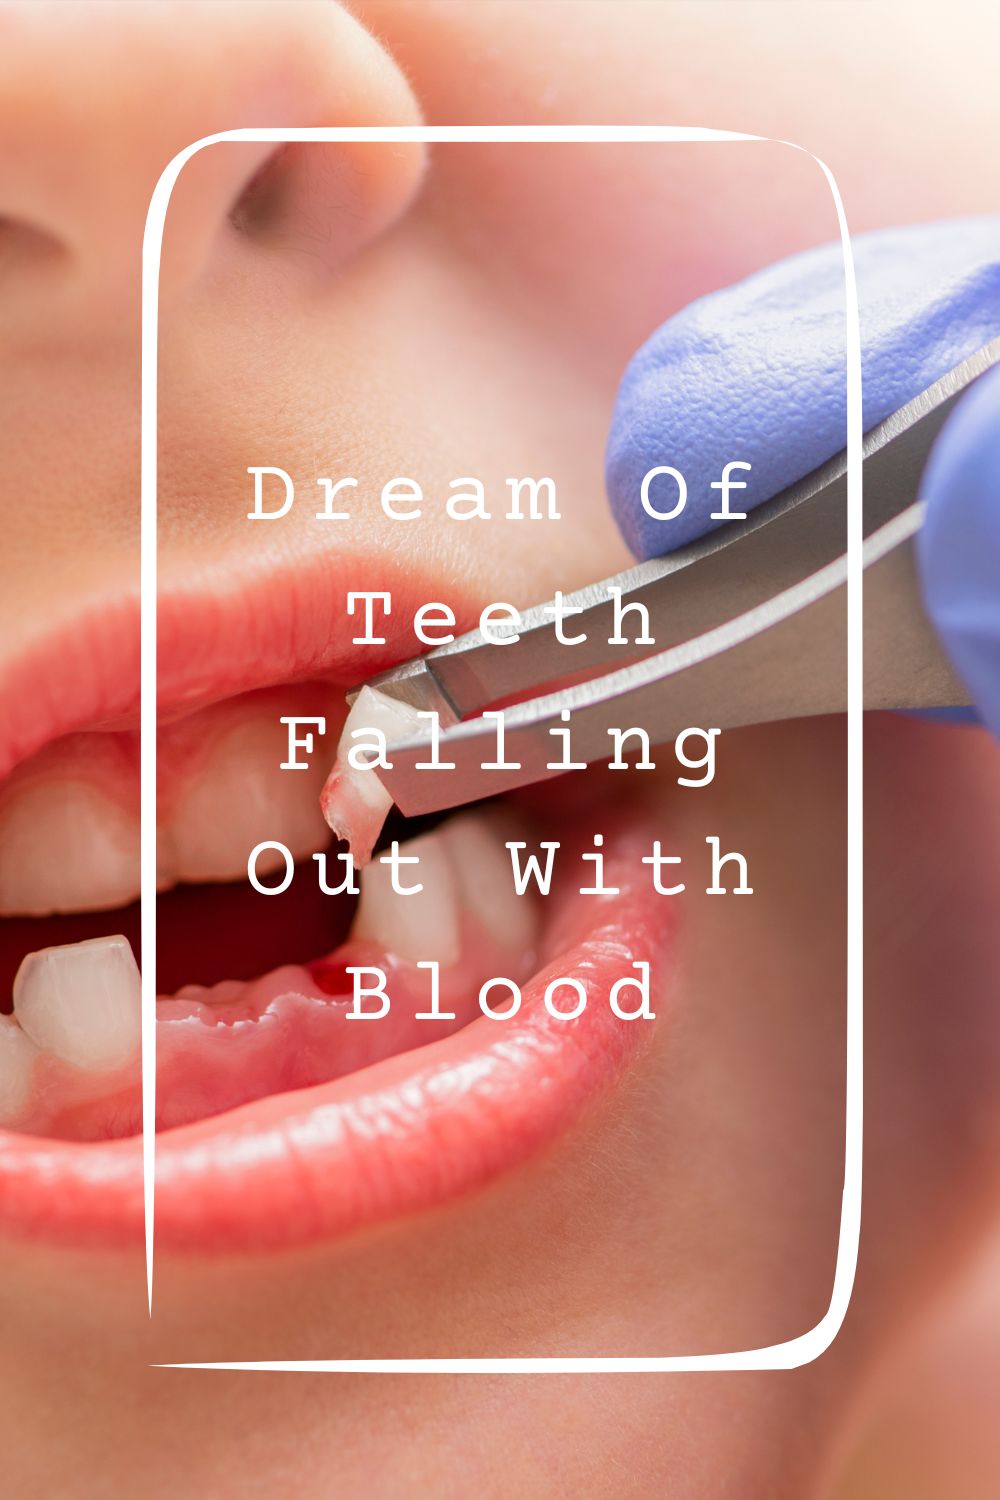 Dream Of Teeth Falling Out With Blood Meanings 2